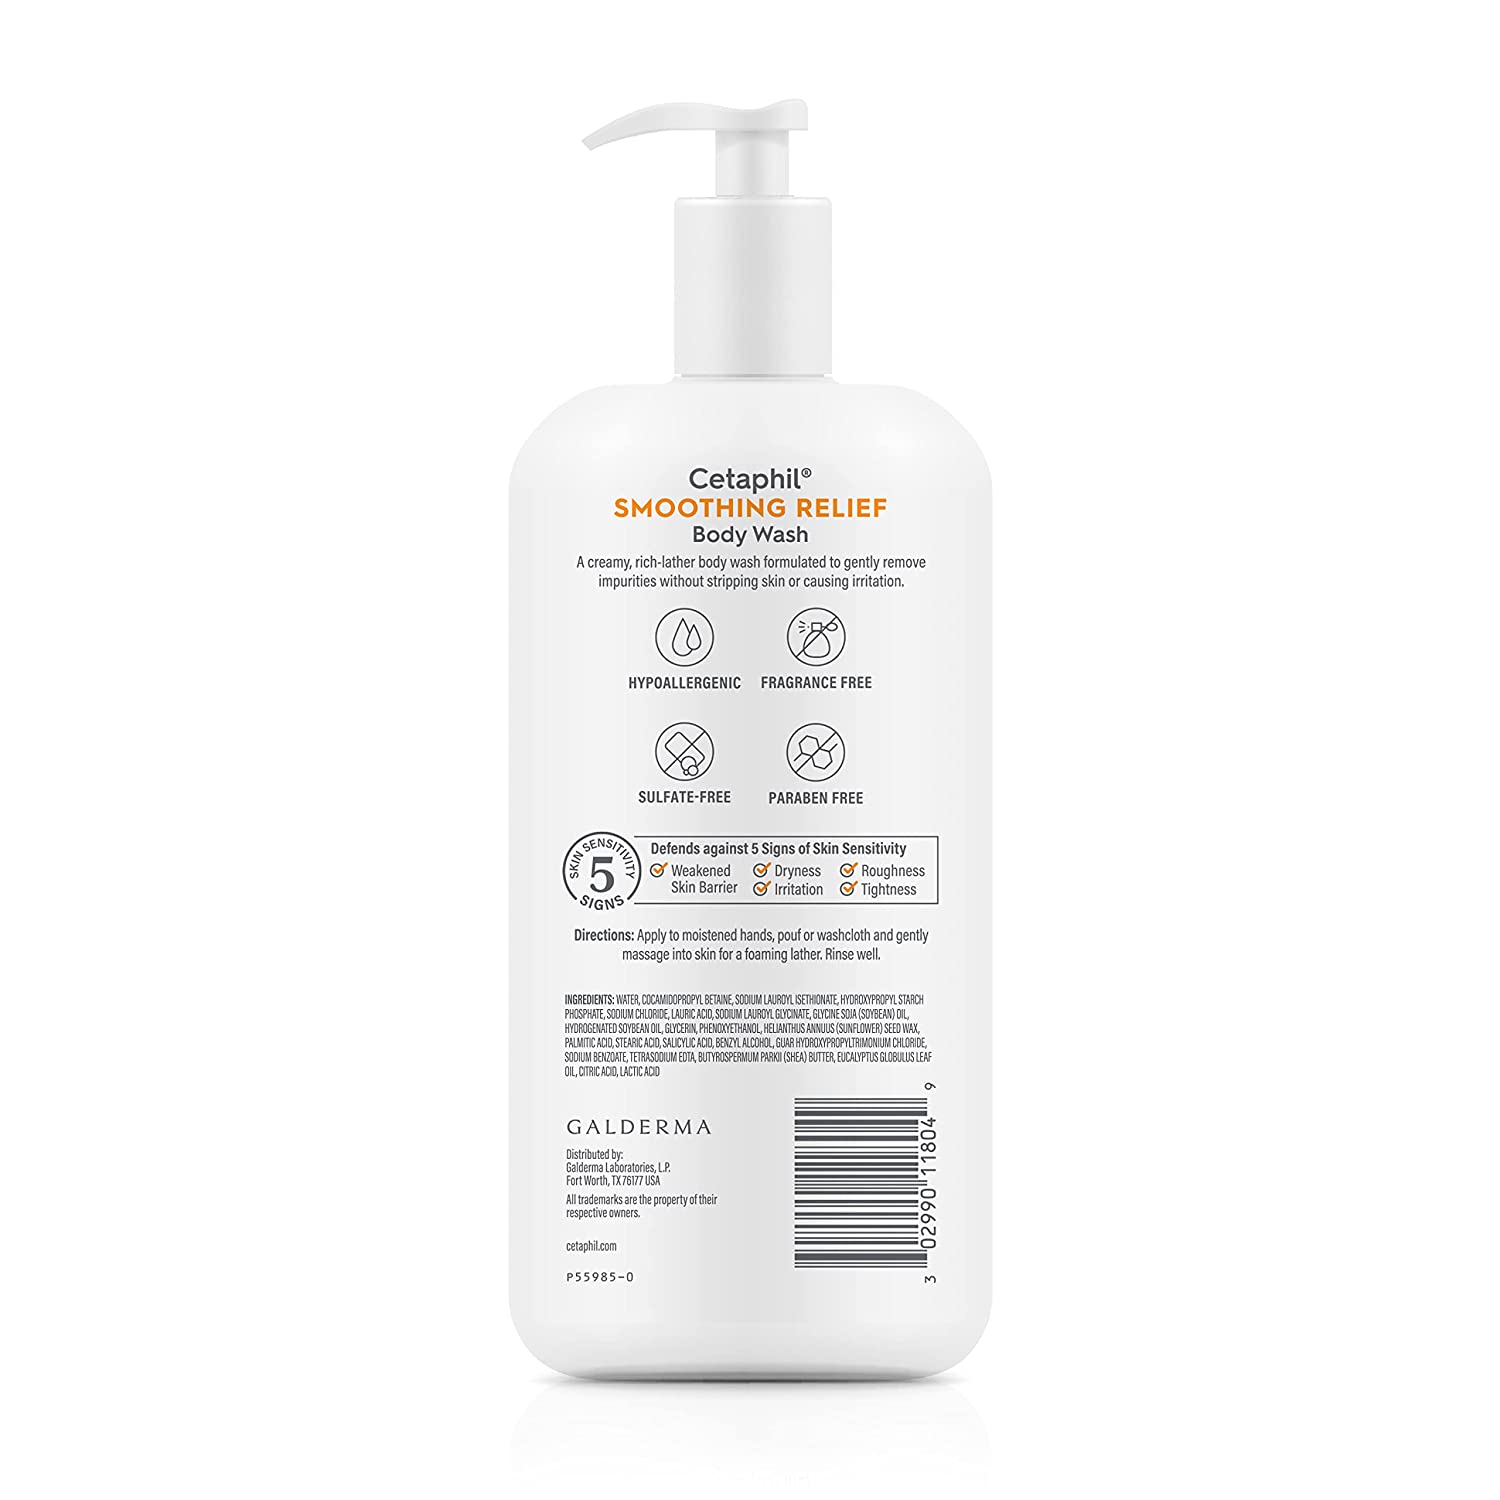 SMOOTHING RELIEF BODY WASH for Rough, Textured Skin